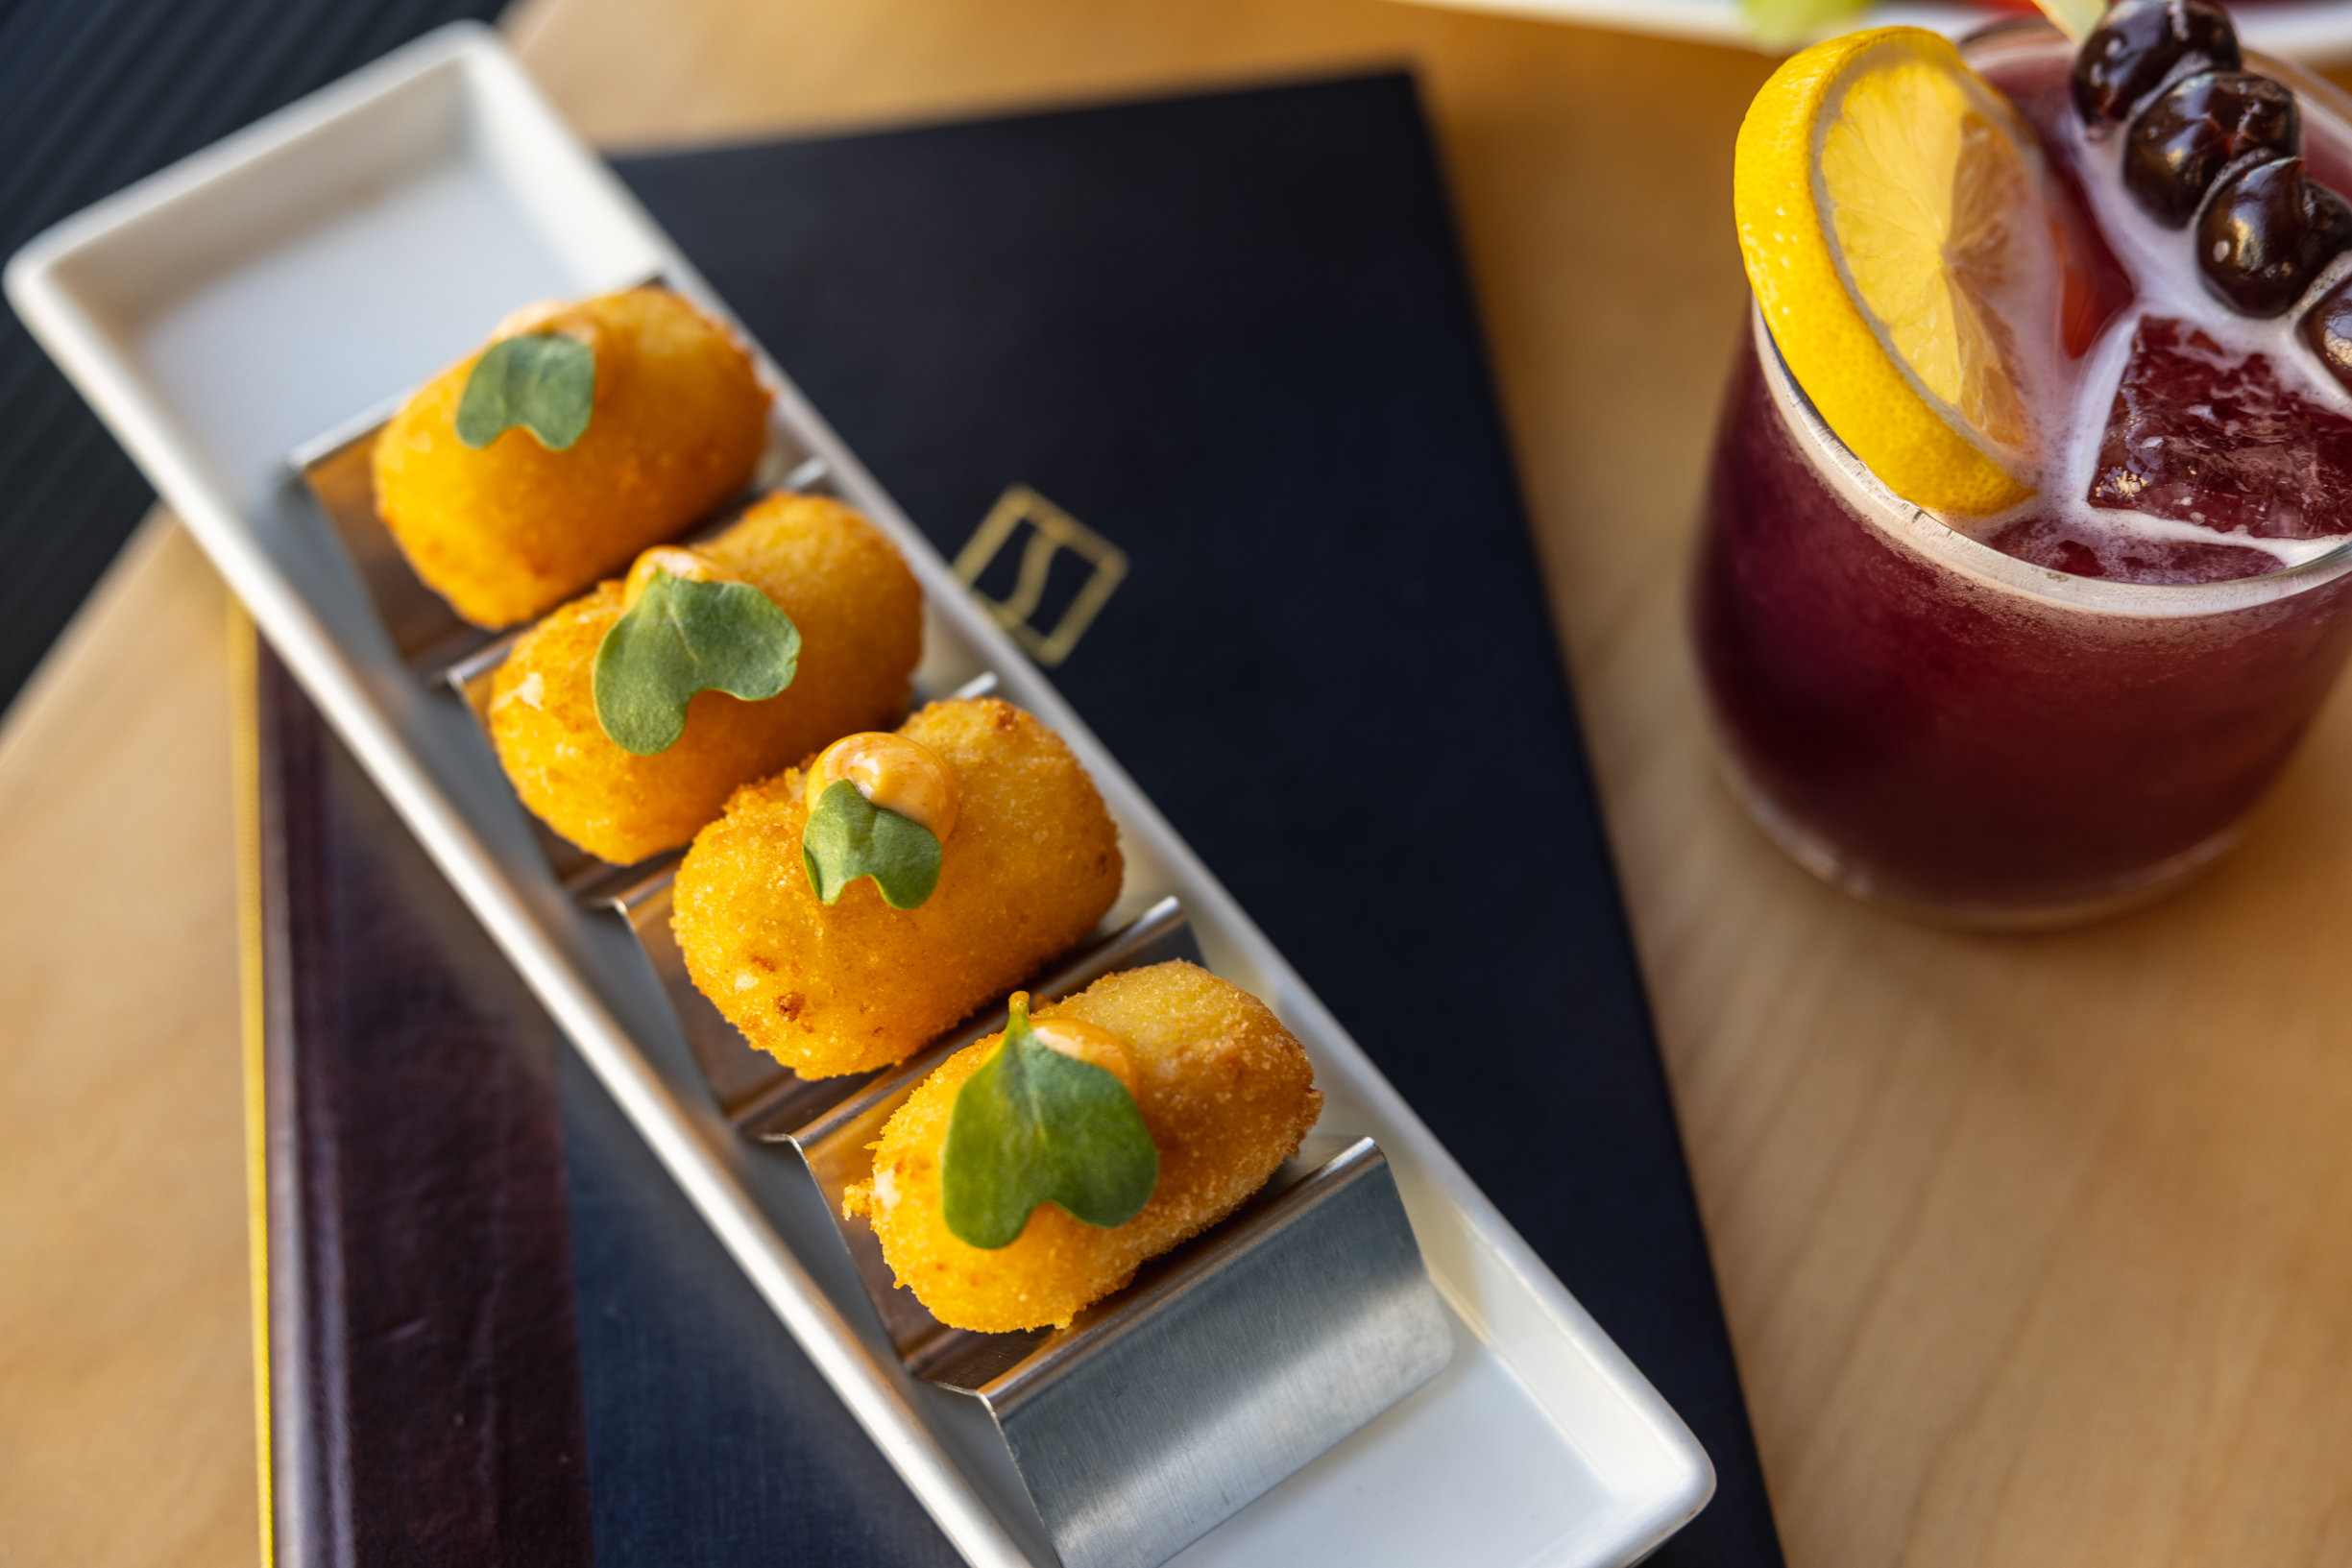 spicy queso croquette and bourbon street cocktail at the bar and lounge and event space the skylark nyc in midtown manhattan